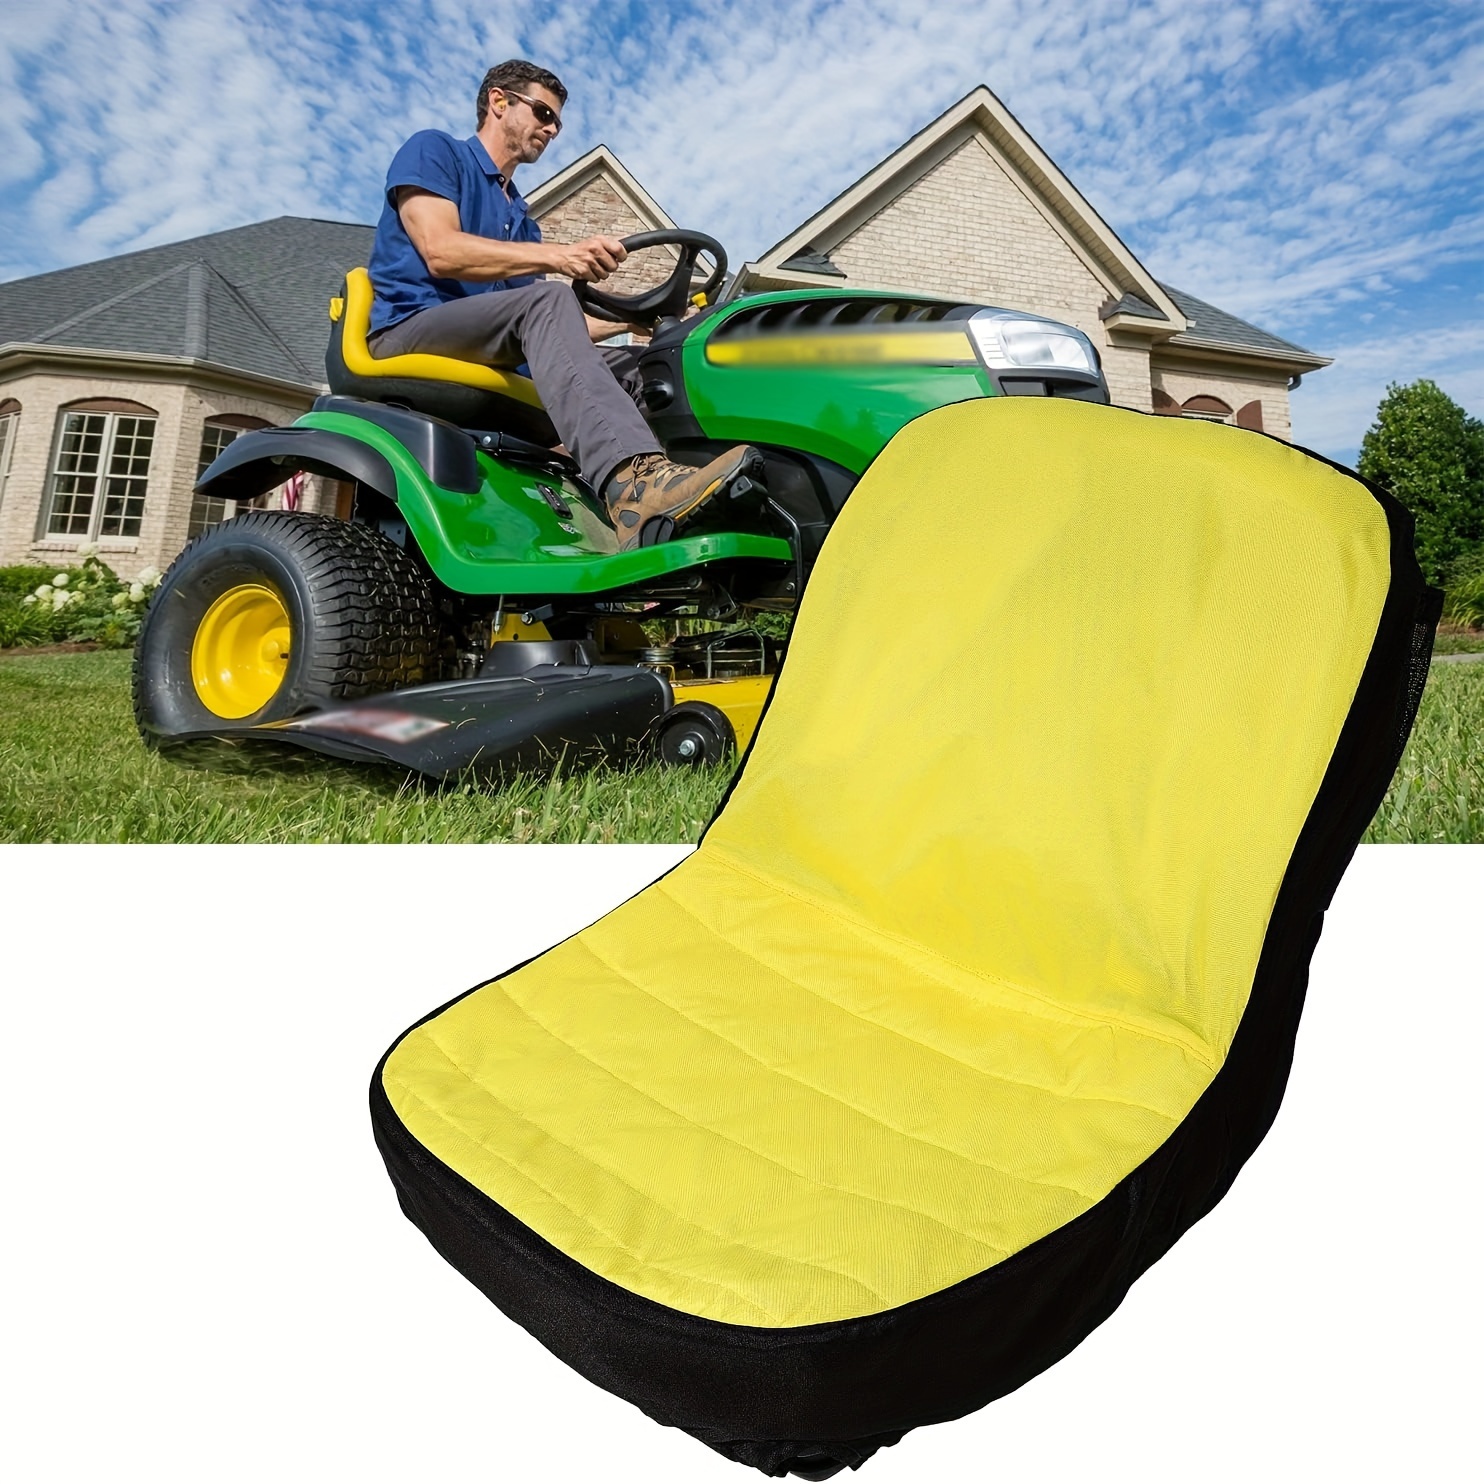 

Riding Lawn Mower Seat Cover Compatible With John Deere Tractors Gator Series, Durable Protective Cushion With Elastic Cord For Secure Fit, Easy Installation, Up To 18-inch Seats - Lp92334